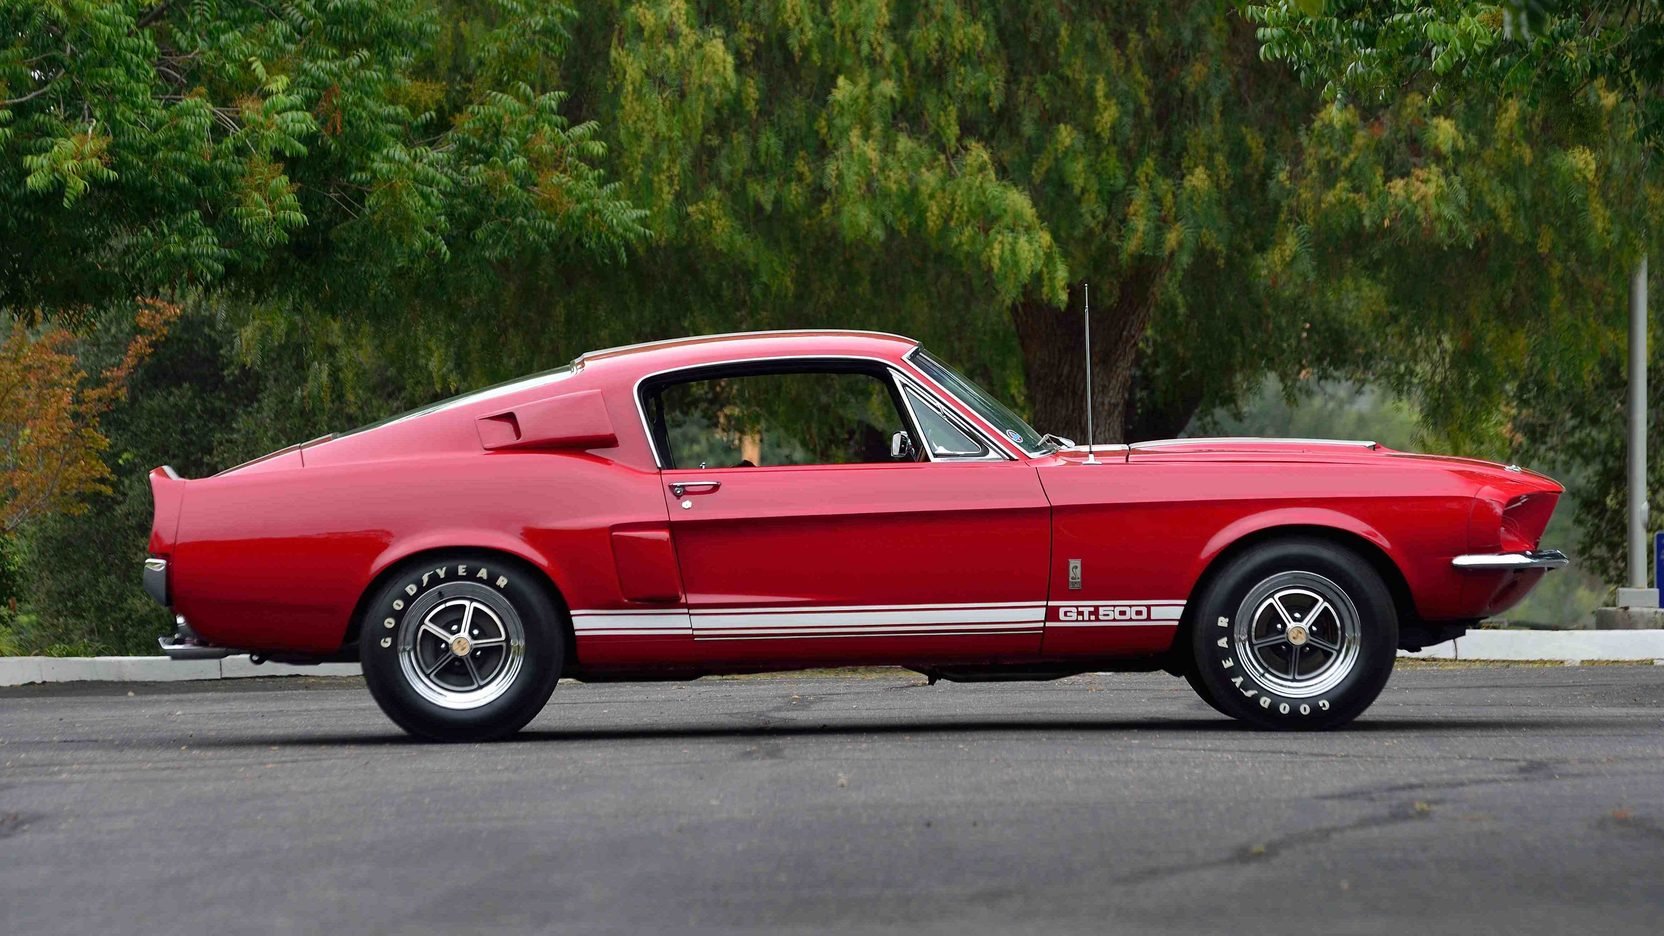 1967, Shelby, Gt500, Fastback, Ford, Mustang, Red, Cars Wallpaper